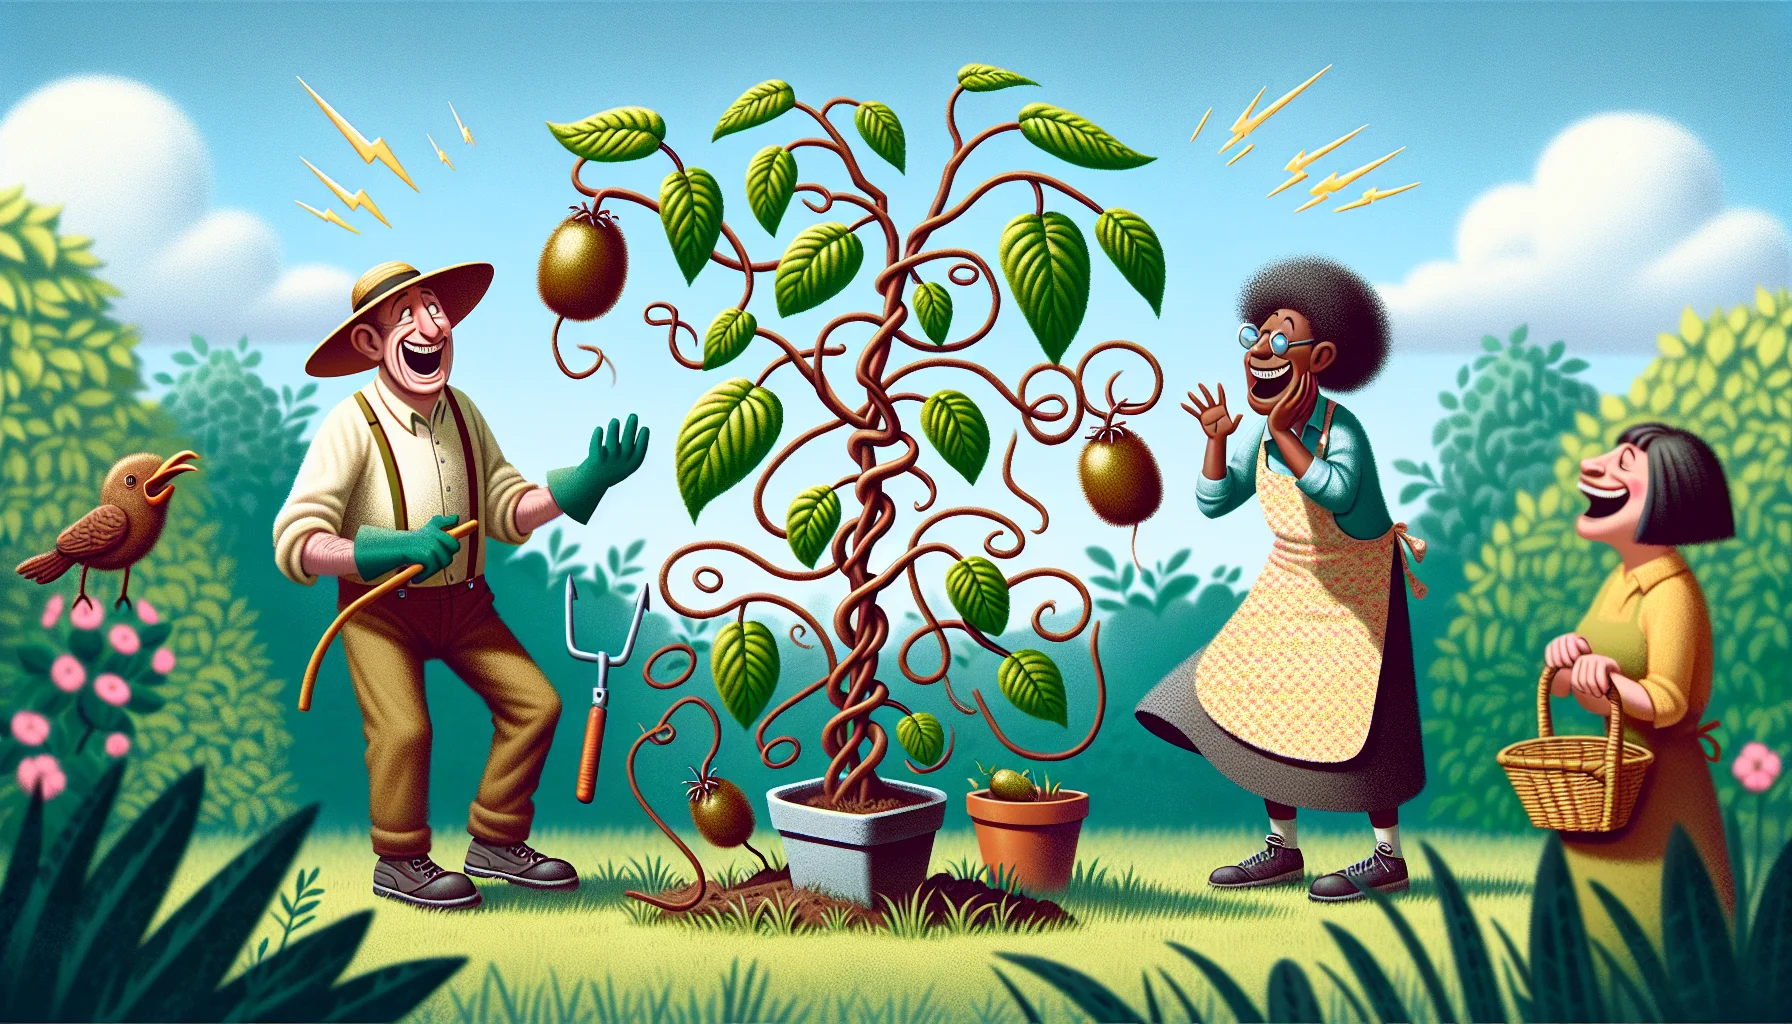 Depict a humorous scene in a garden setting where Actinidia Chinensis, also known as the kiwi plant, seems to be engaging in playful behaviors. The kiwi plant could be twisting its vines in dance-like movements, or perhaps its fruits are jumping up and down on their branches. Nearby, a Caucasian man in his 40s with a sun hat and gardening gloves and a Black woman in her 30s with a ponytail and an apron are laughing and enjoying this whimsical display, encouraging onlookers to perceive gardening as a delightful activity.